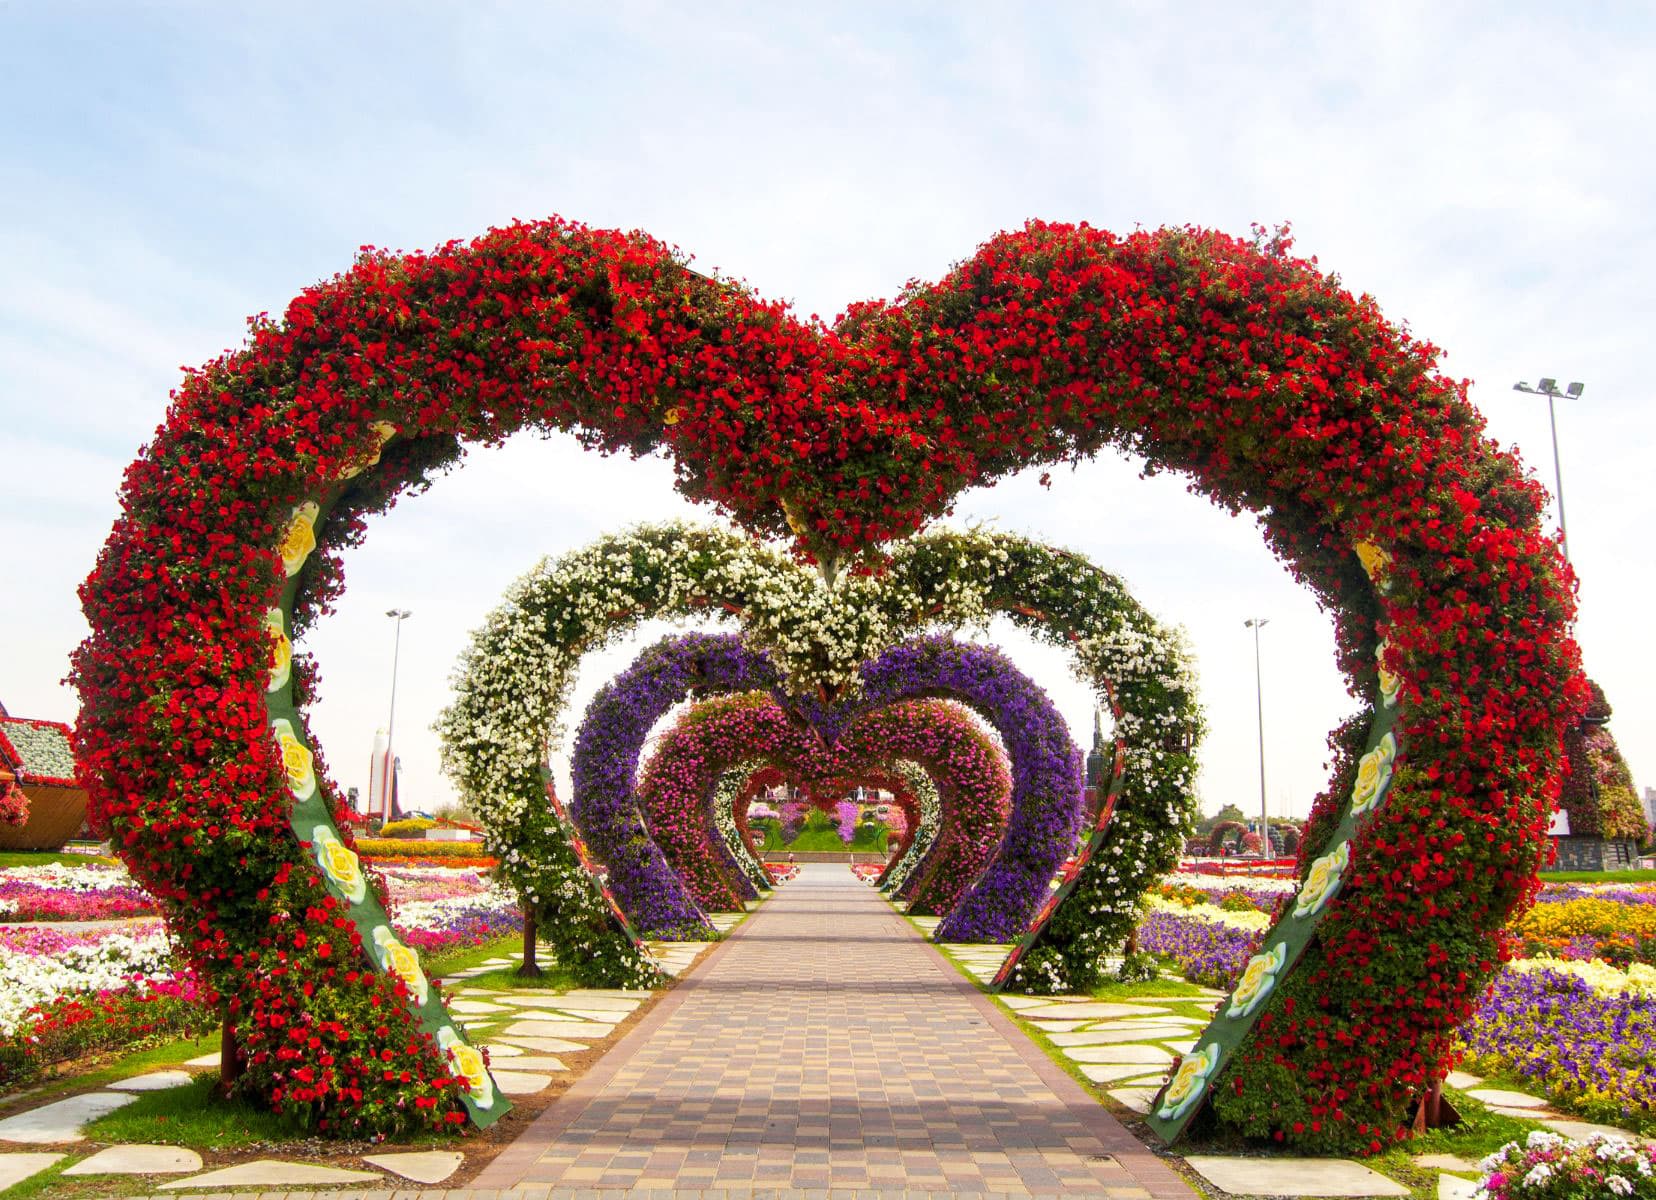 Flower covered heart arches all along a road  